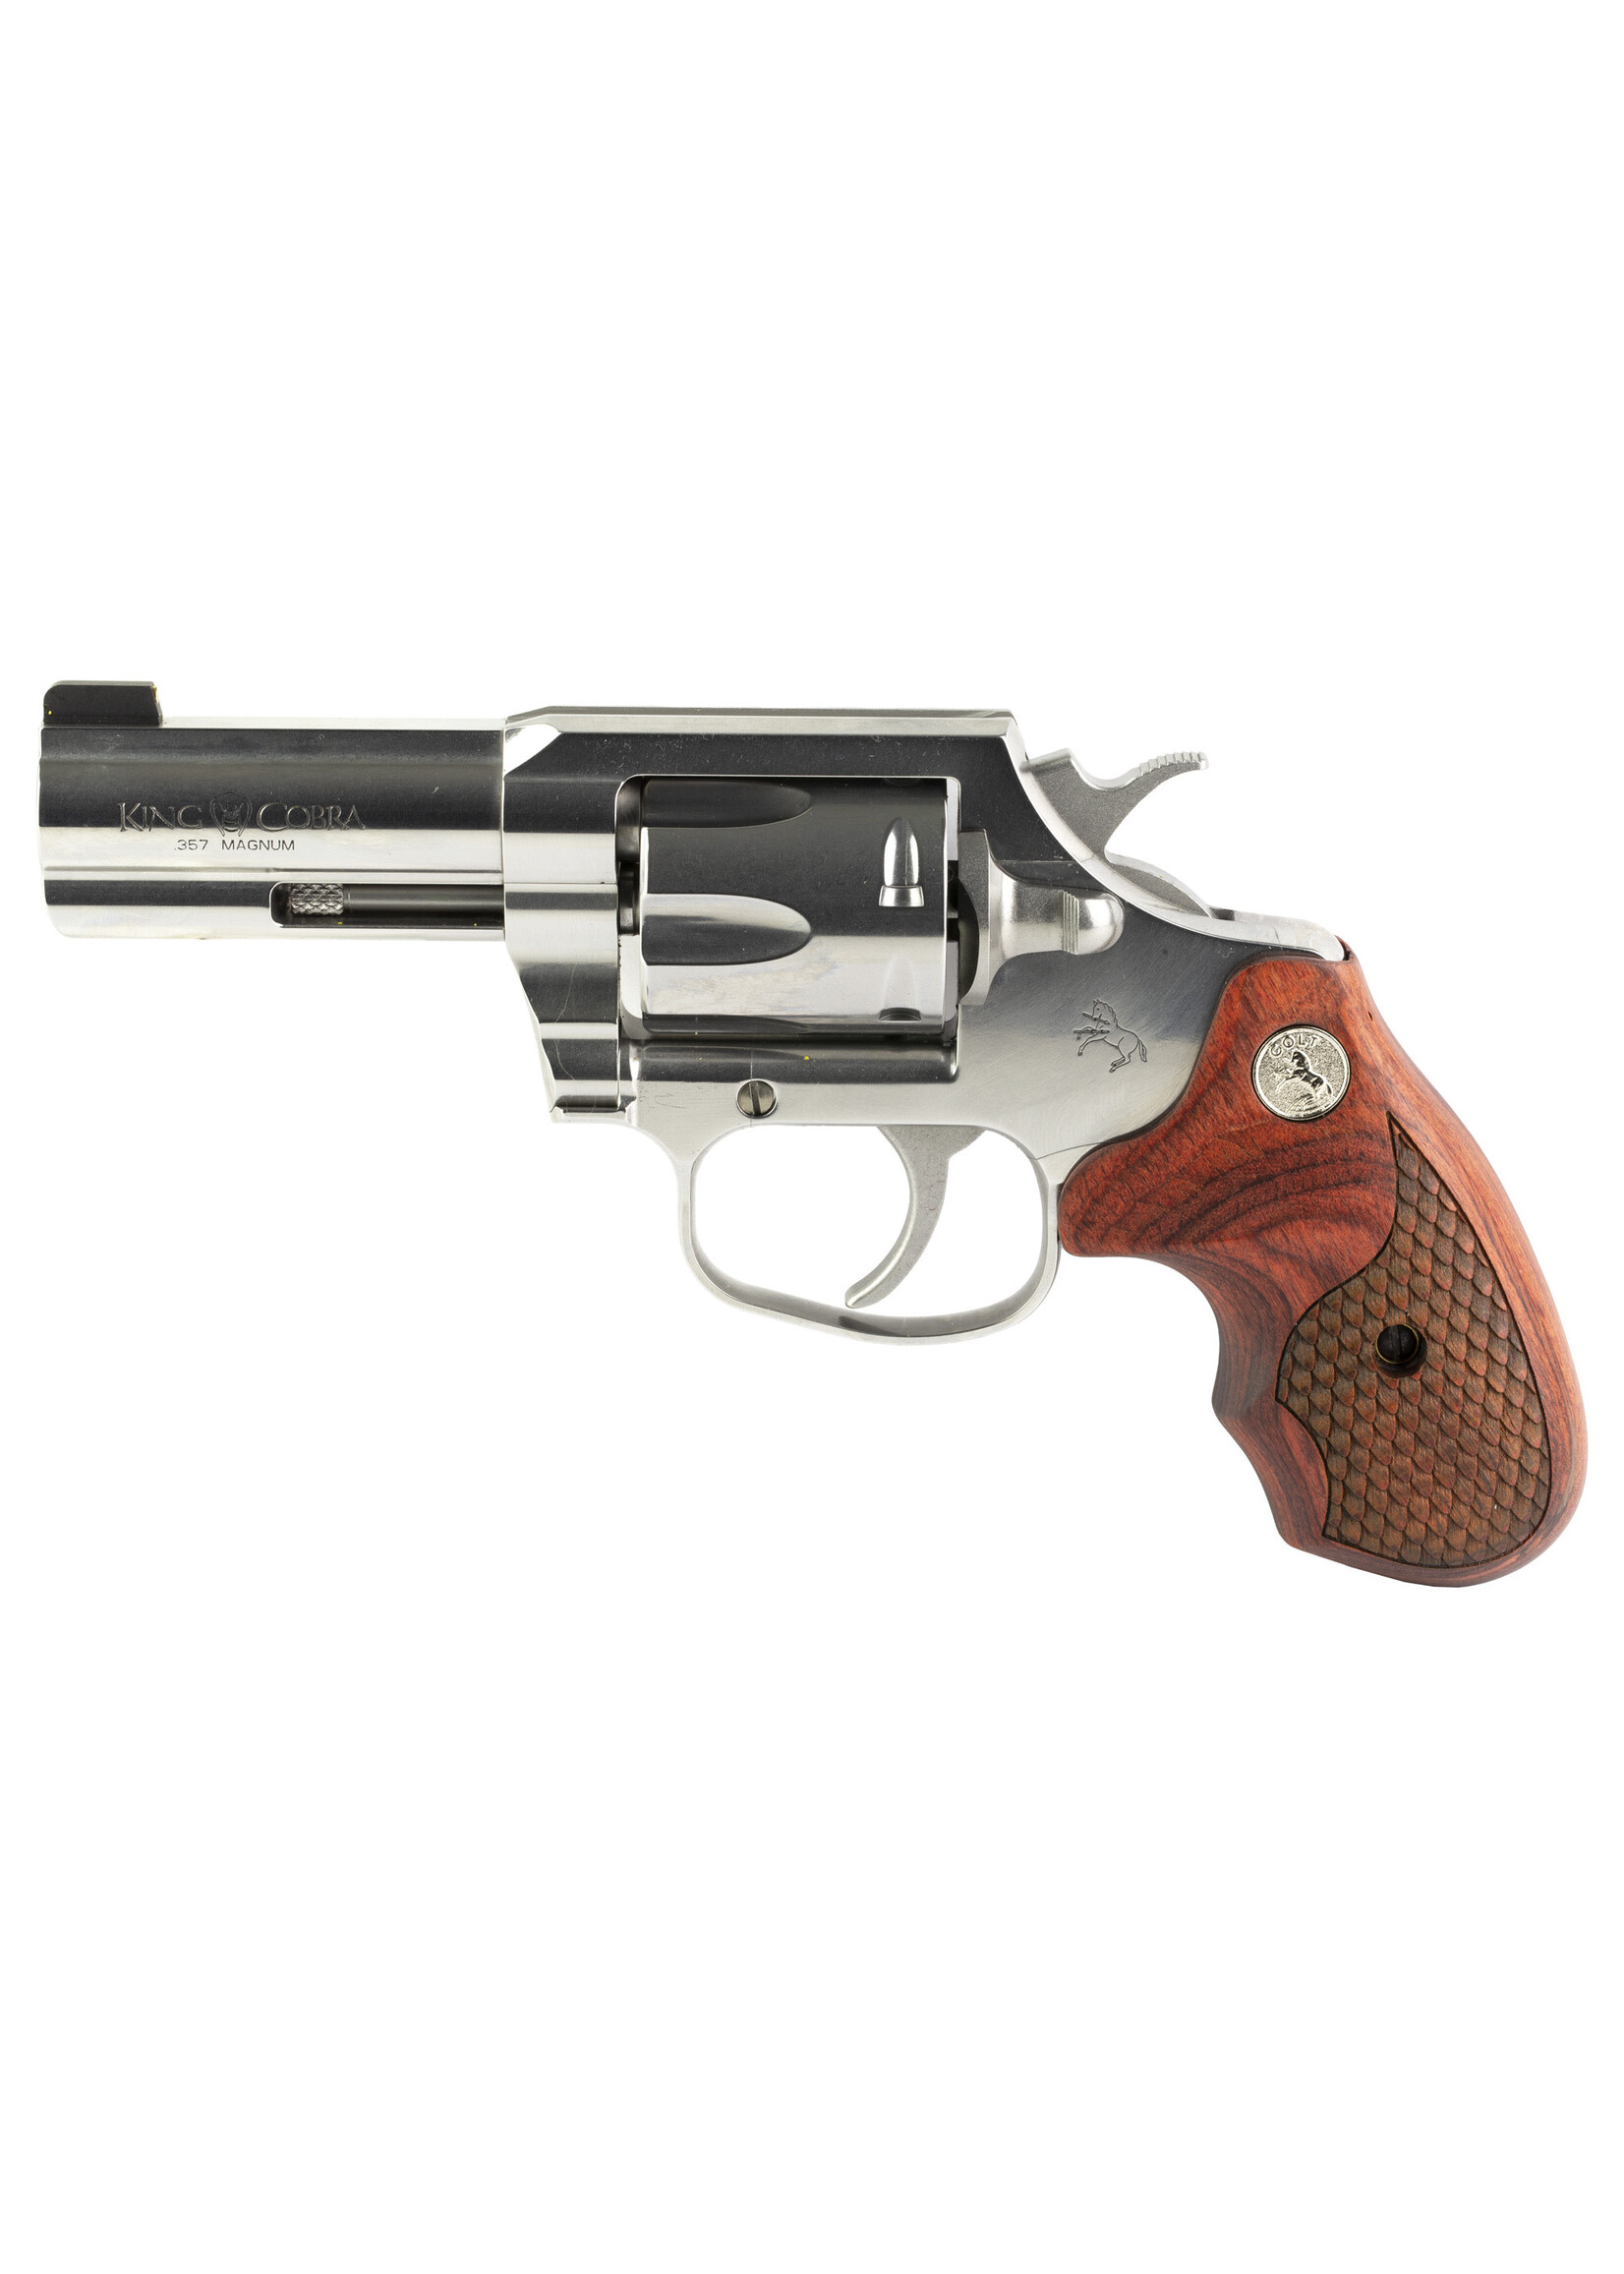 Colt Mfg Colt's Manufacturing, King Cobra, Revolver, 357 Magnum, 3" Barrel, Steel, Stainless Finish, Hogue Grips, Brass Bead Front Sight, 6 Rounds, Upgraded Snake Scale Pattern Walnut Grips